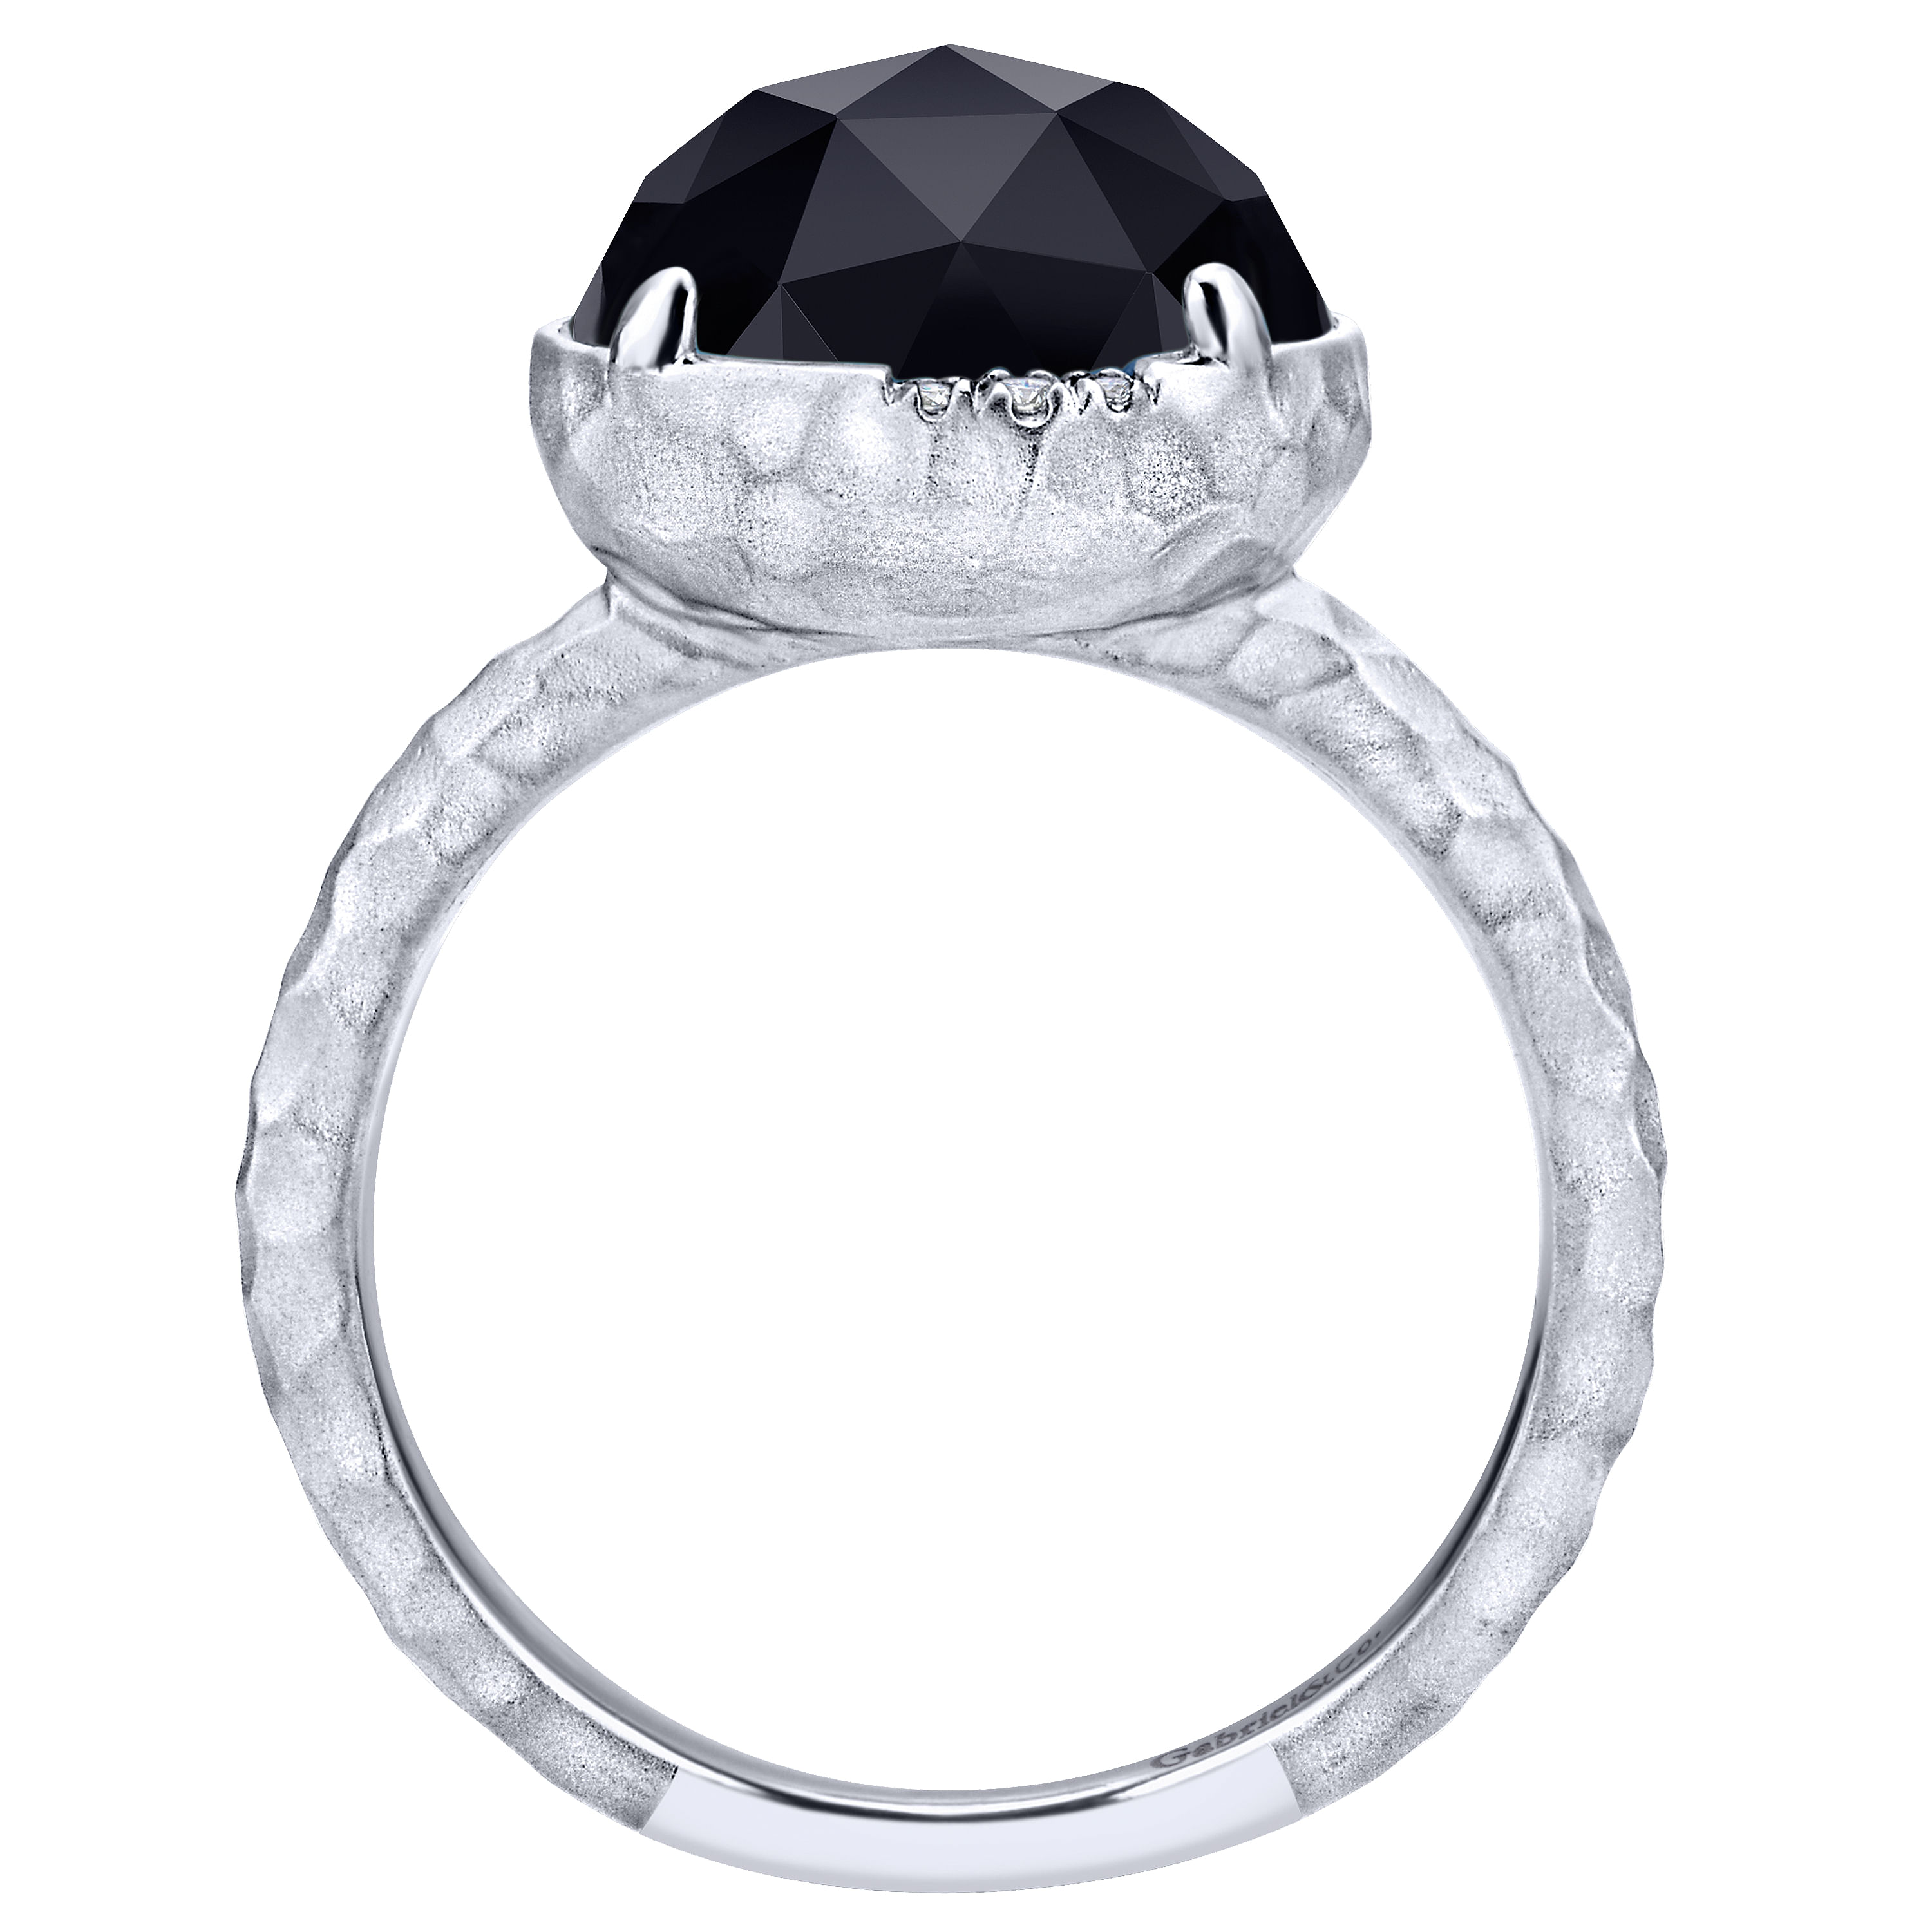 925 Sterling Silver Round Rock Crystal/Black Onyx and Diamond Ring